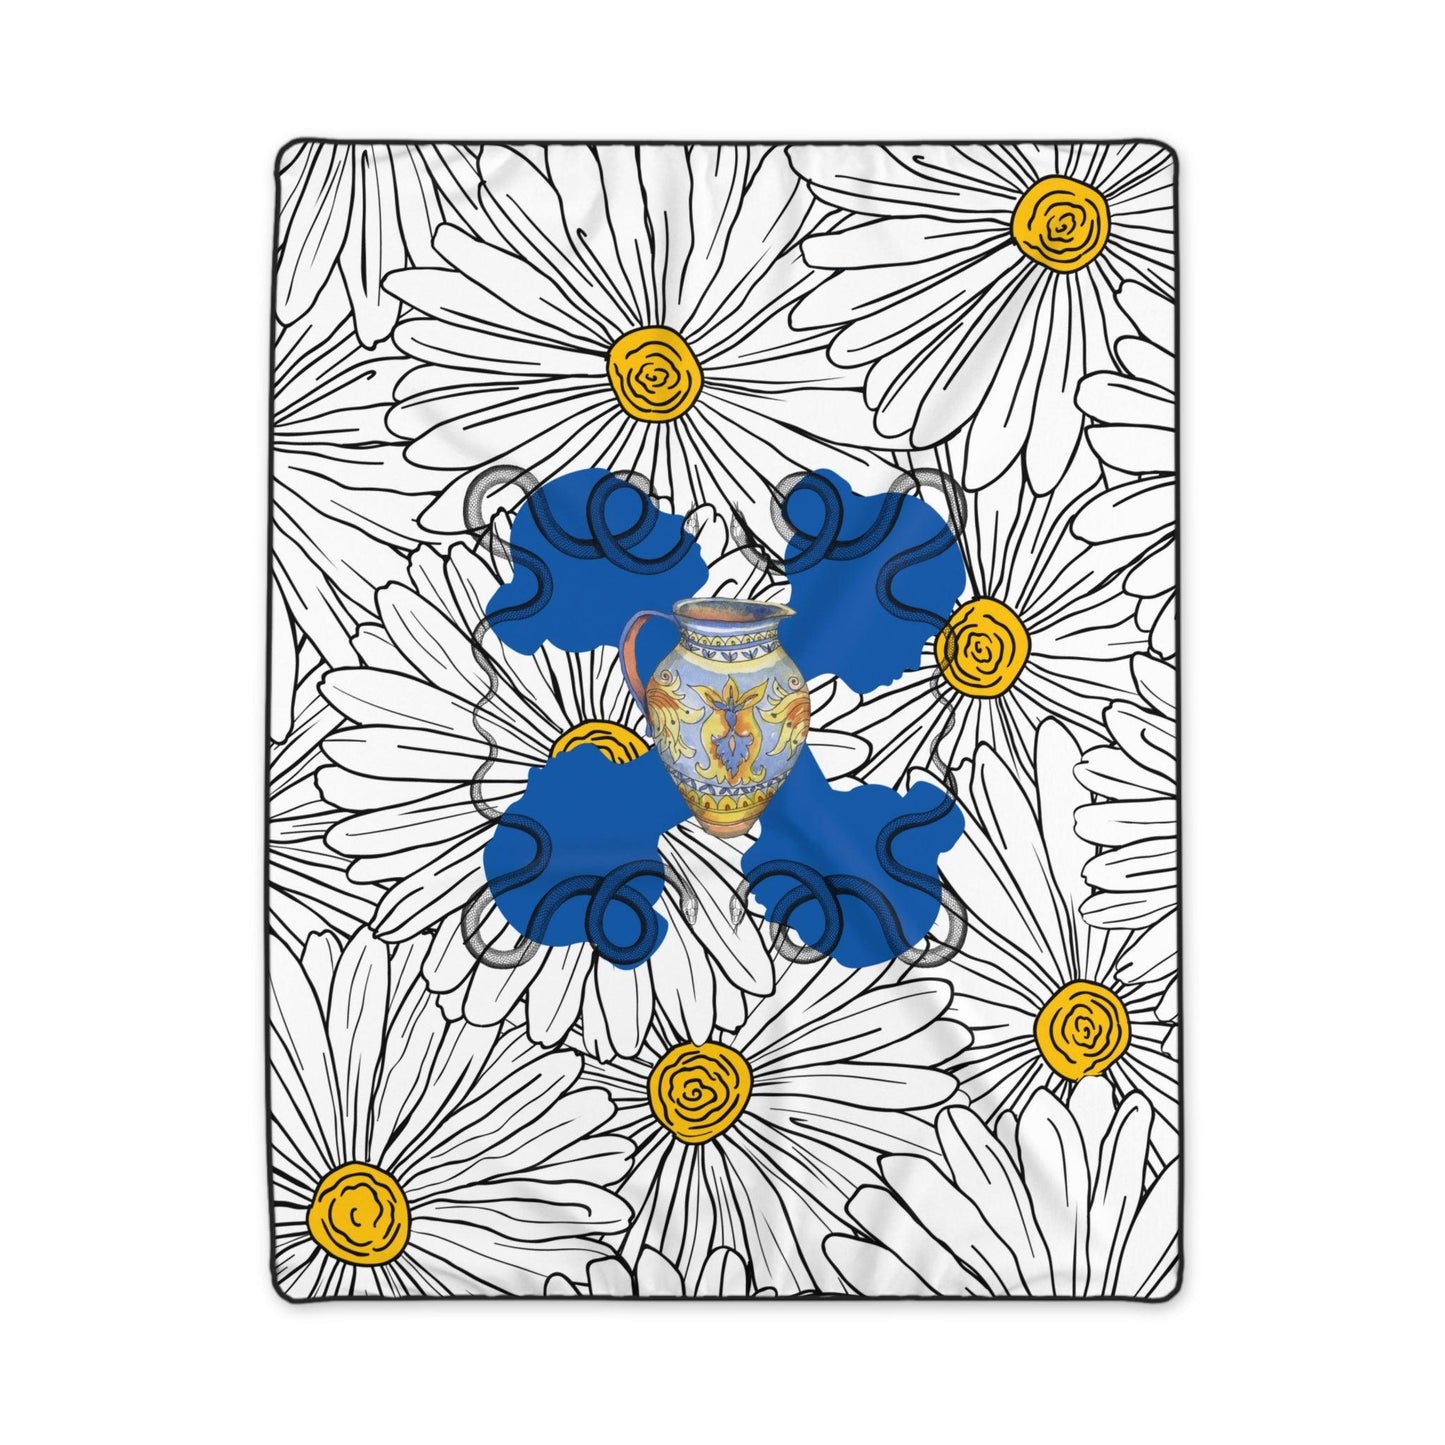 White Daisy Ladies in Blue Throw Blanket - MAIA HOMES